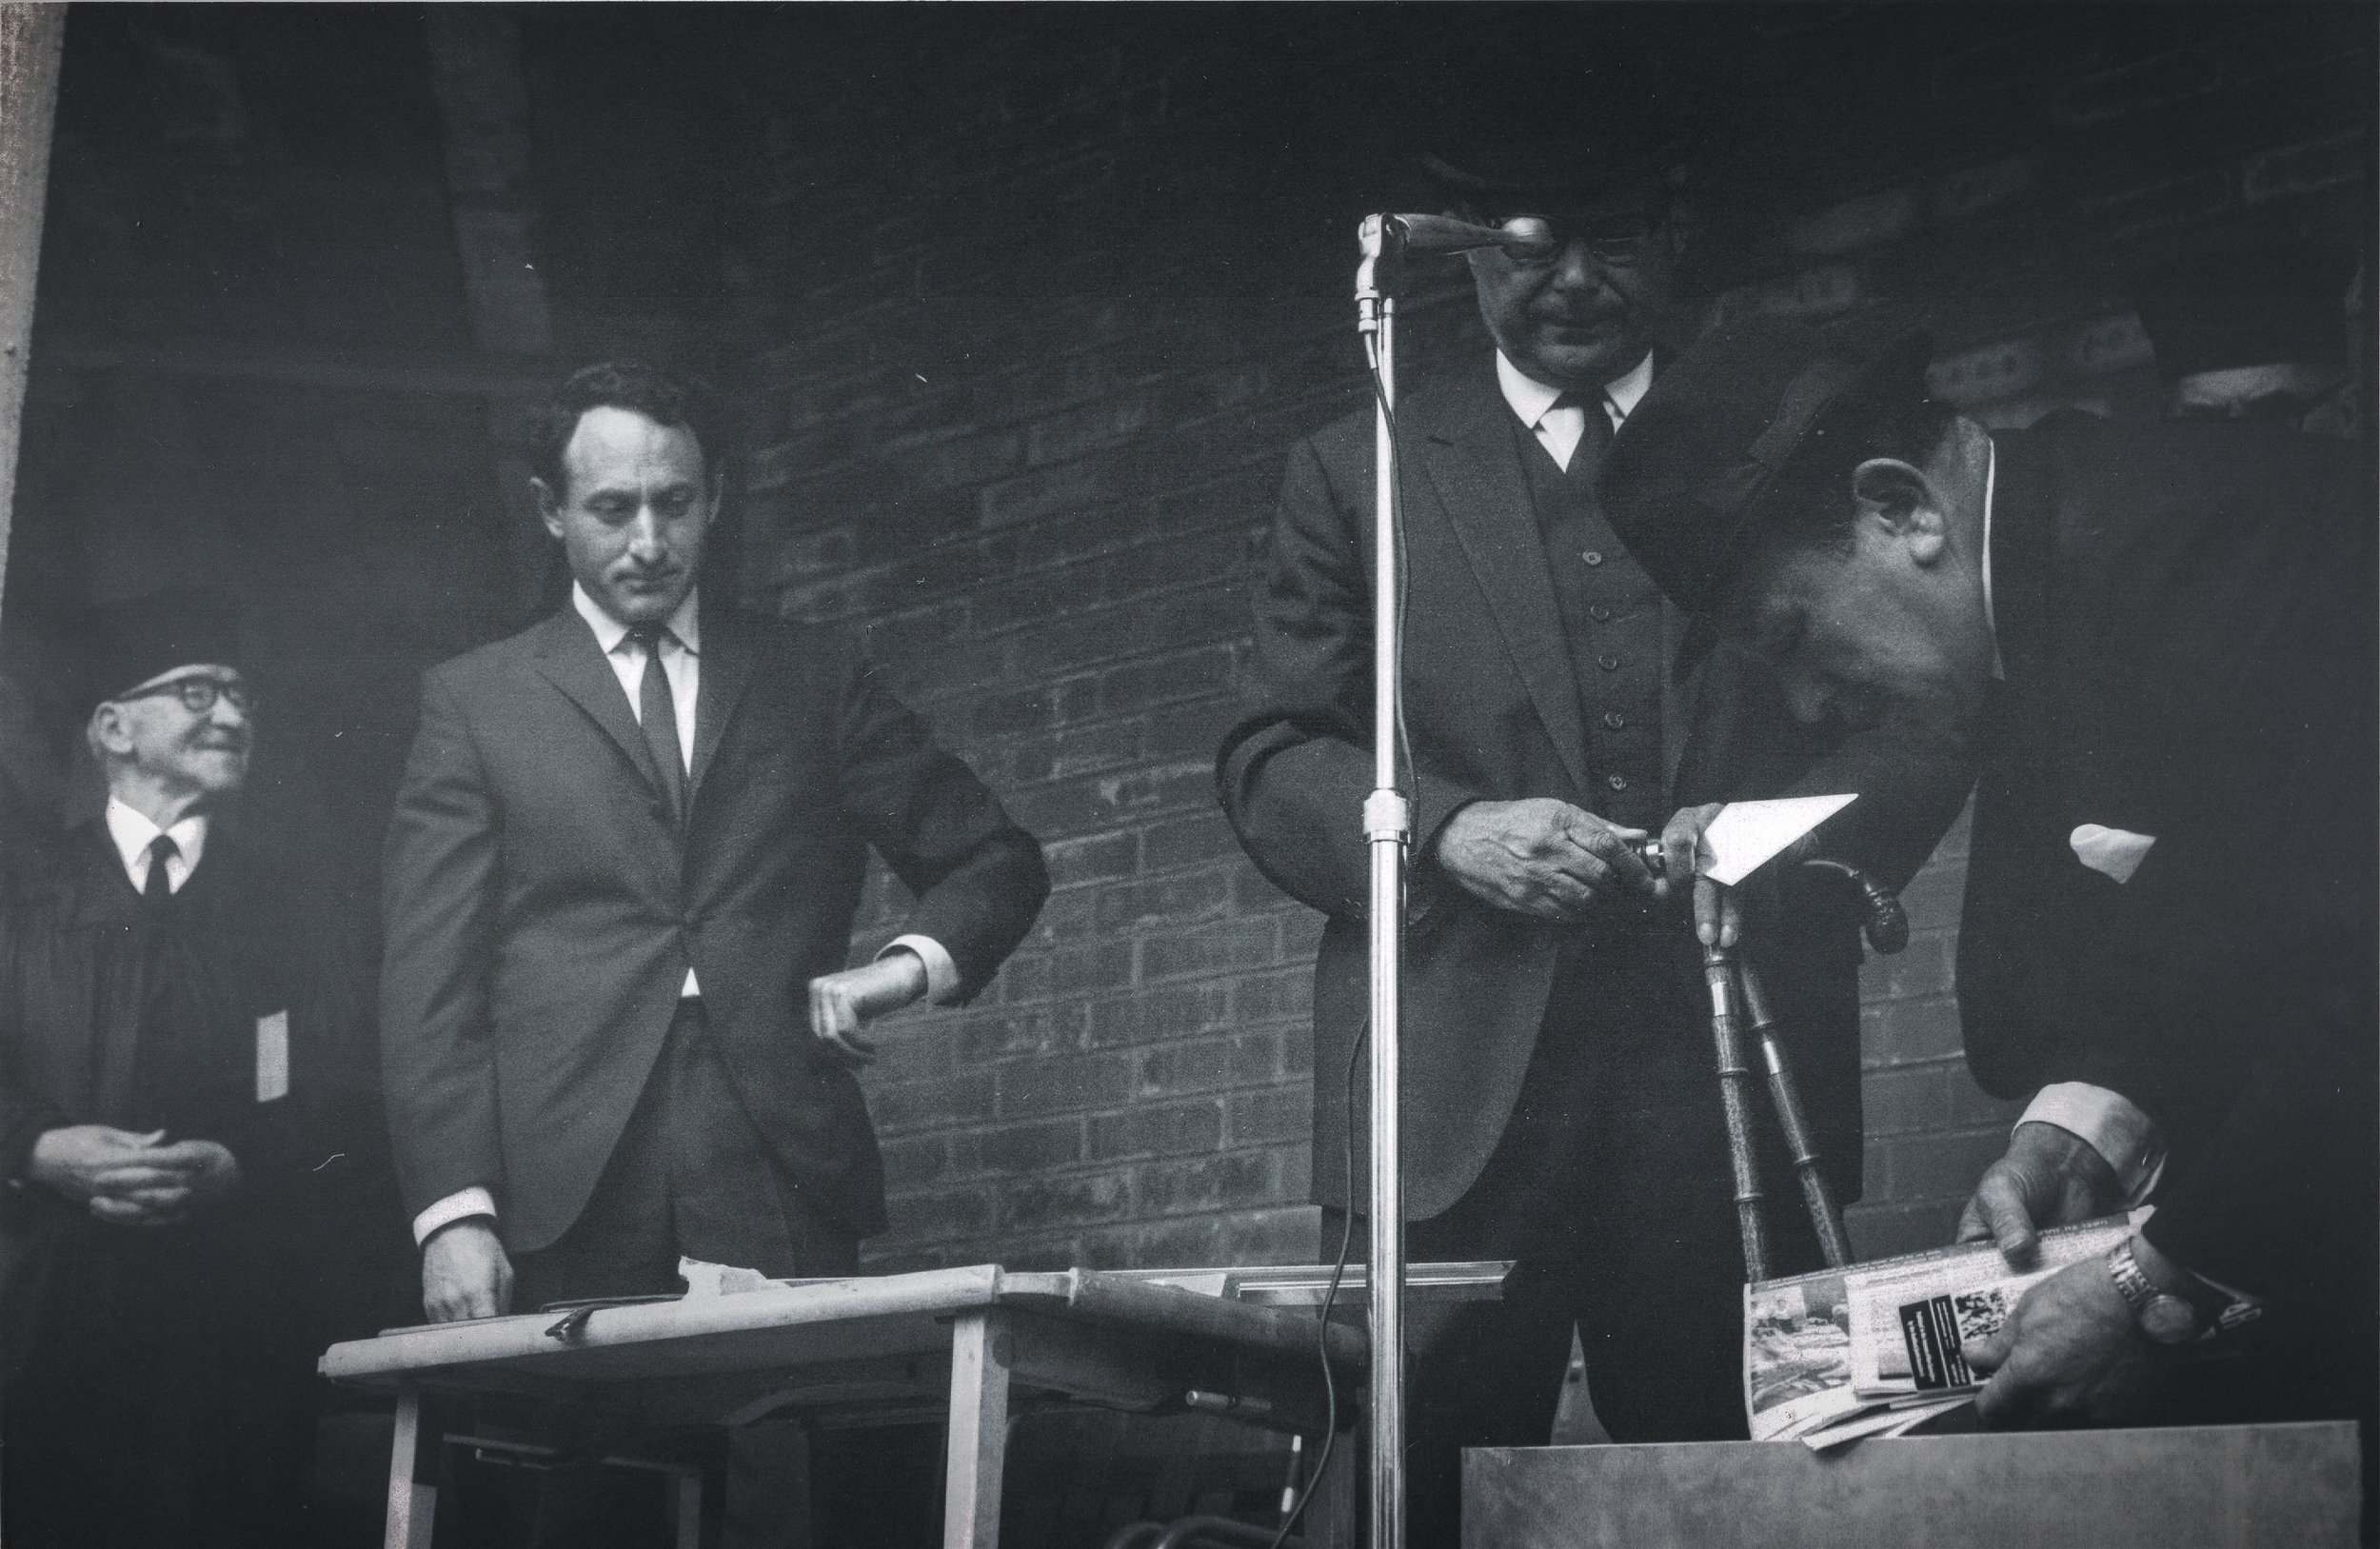  Mr E.I. Barnett, placing items of interest in the Time Capsule. John Goldwater and L.D. Nathan also pictured.  (Source: HaShofar, Nov 1967, Vol 9, No. 8). 